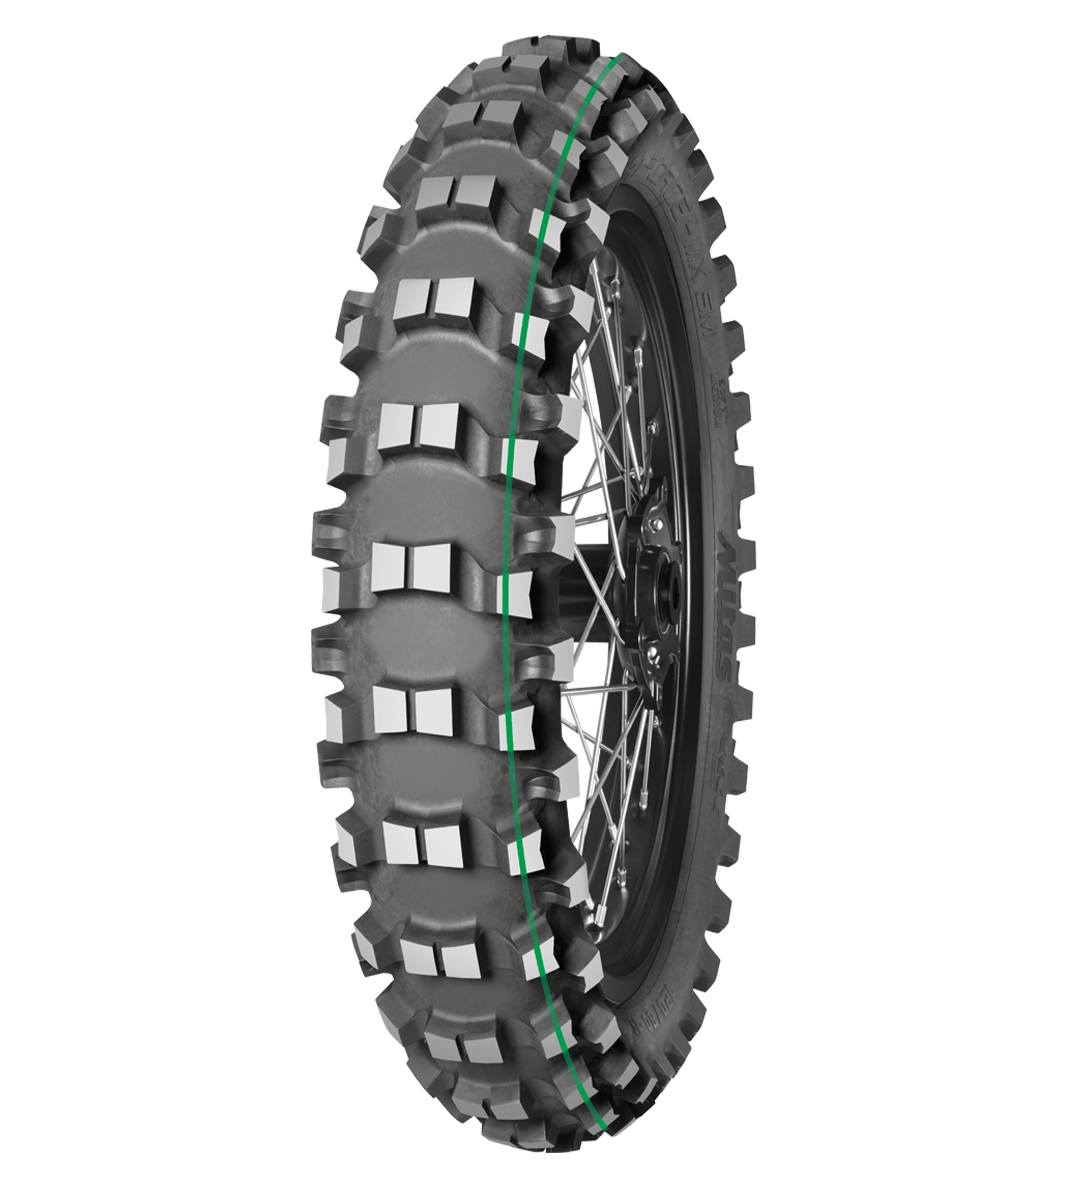 Mitas TERRA FORCE-MX SM 110/100-18 Enduro Competition Off-Road SUPER LIGHT 64M Green Tube Rear Tire, 226323, 110/100-18, Enduro Competition, Off-Road, Rear, Terra Force, Terra Force-MX SM, Trail, Tires - Imported and distributed in North &amp; South America by Lindeco Genuine Powersports - Premier Powersports Equipment and Accessories for Motorcycle Enthusiasts, Professional Riders and Dealers.